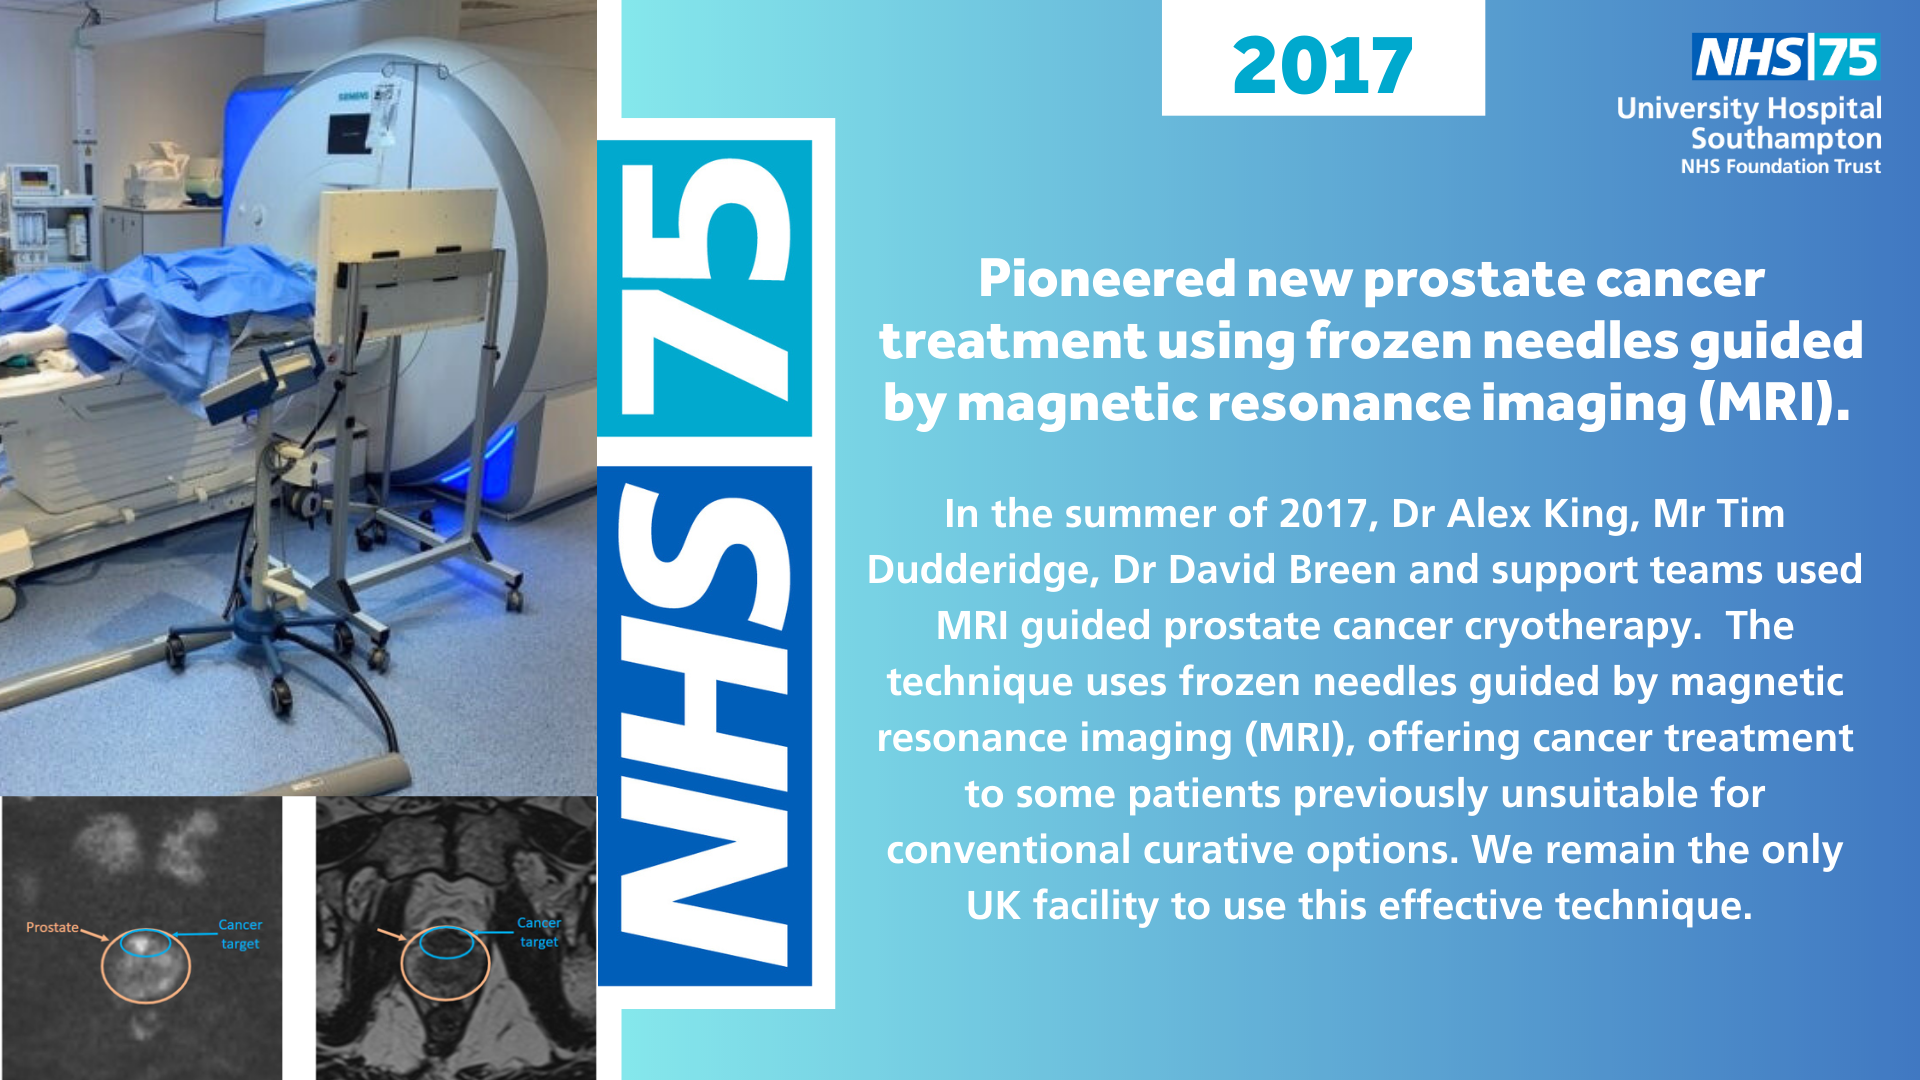 Pioneered new prostate cancer treatment using frozen needles guided by magnetic resonance imaging (MRI)